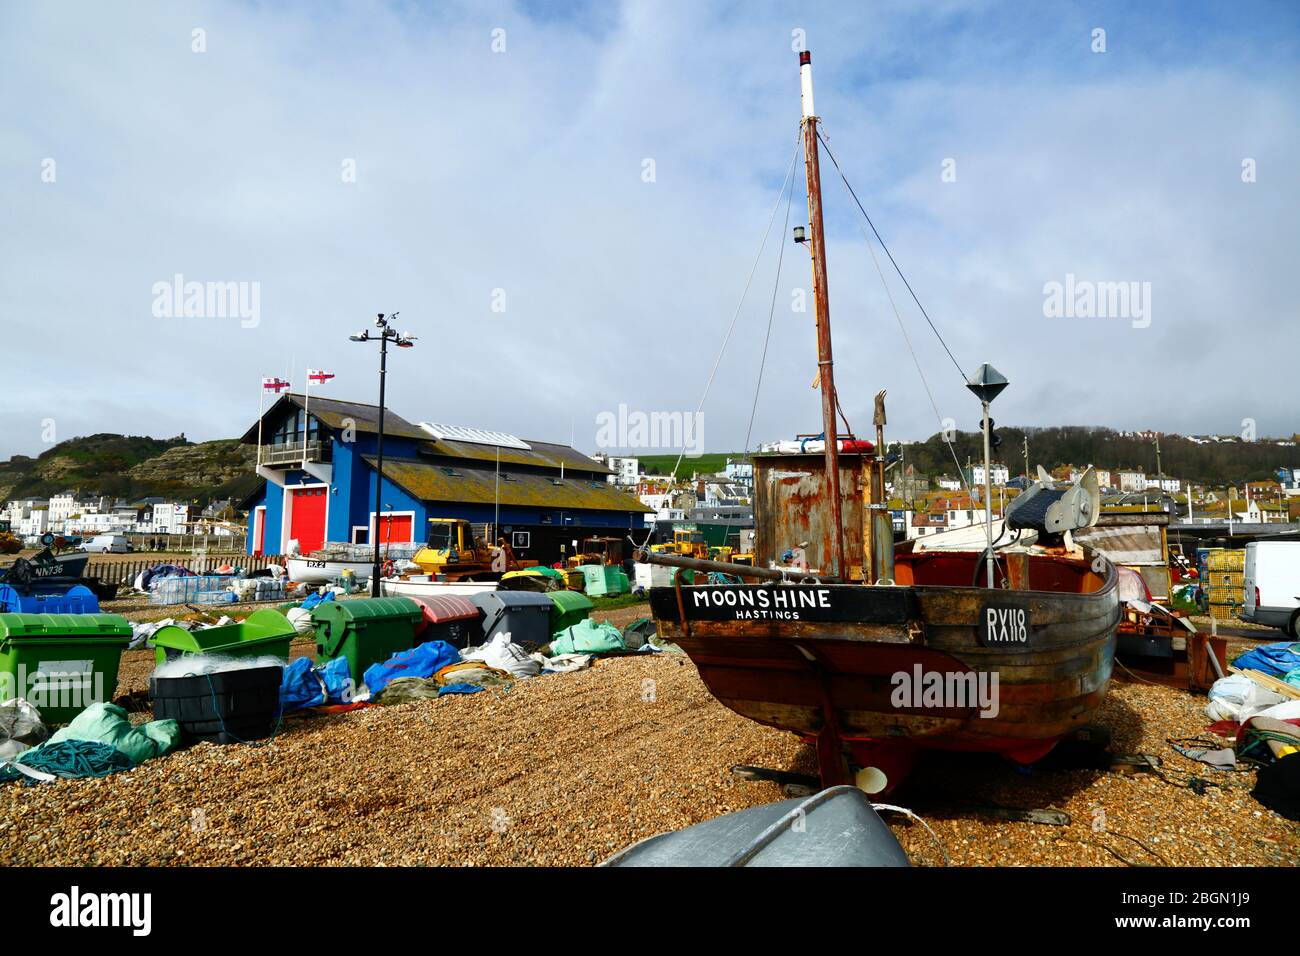 Fishing boat called Moonshine on The Stade shingle beach, lifeboat station in background, Hastings, East Sussex, England, UK Stock Photo